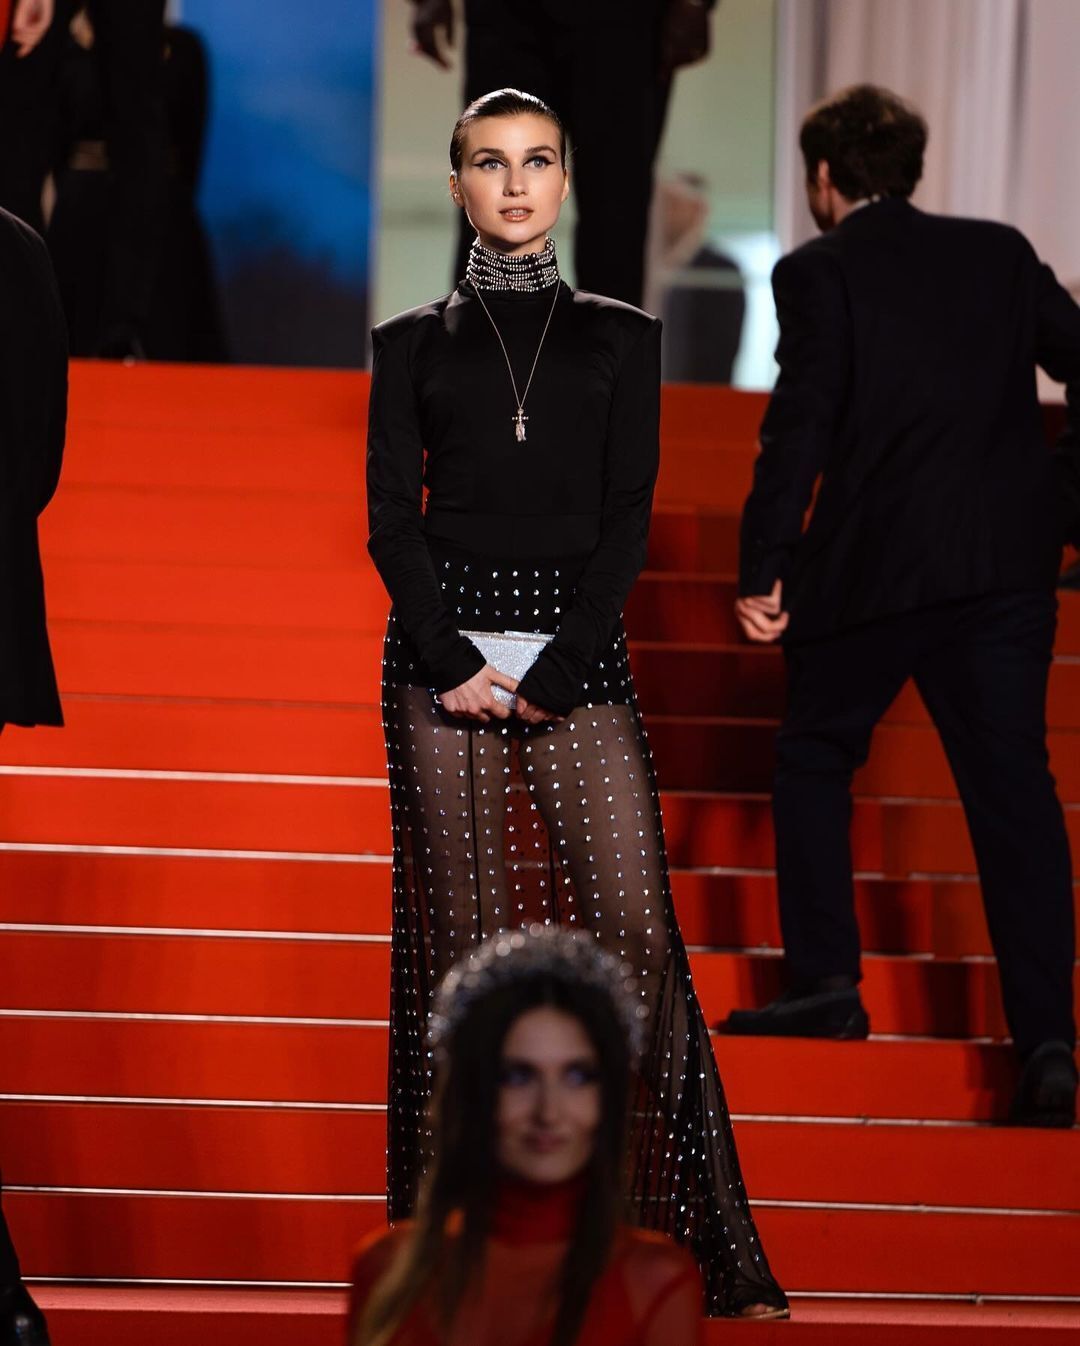 Jerry Heil shows off another look on the Cannes red carpet: the singer appeared in a see-through skirt dotted with rhinestones